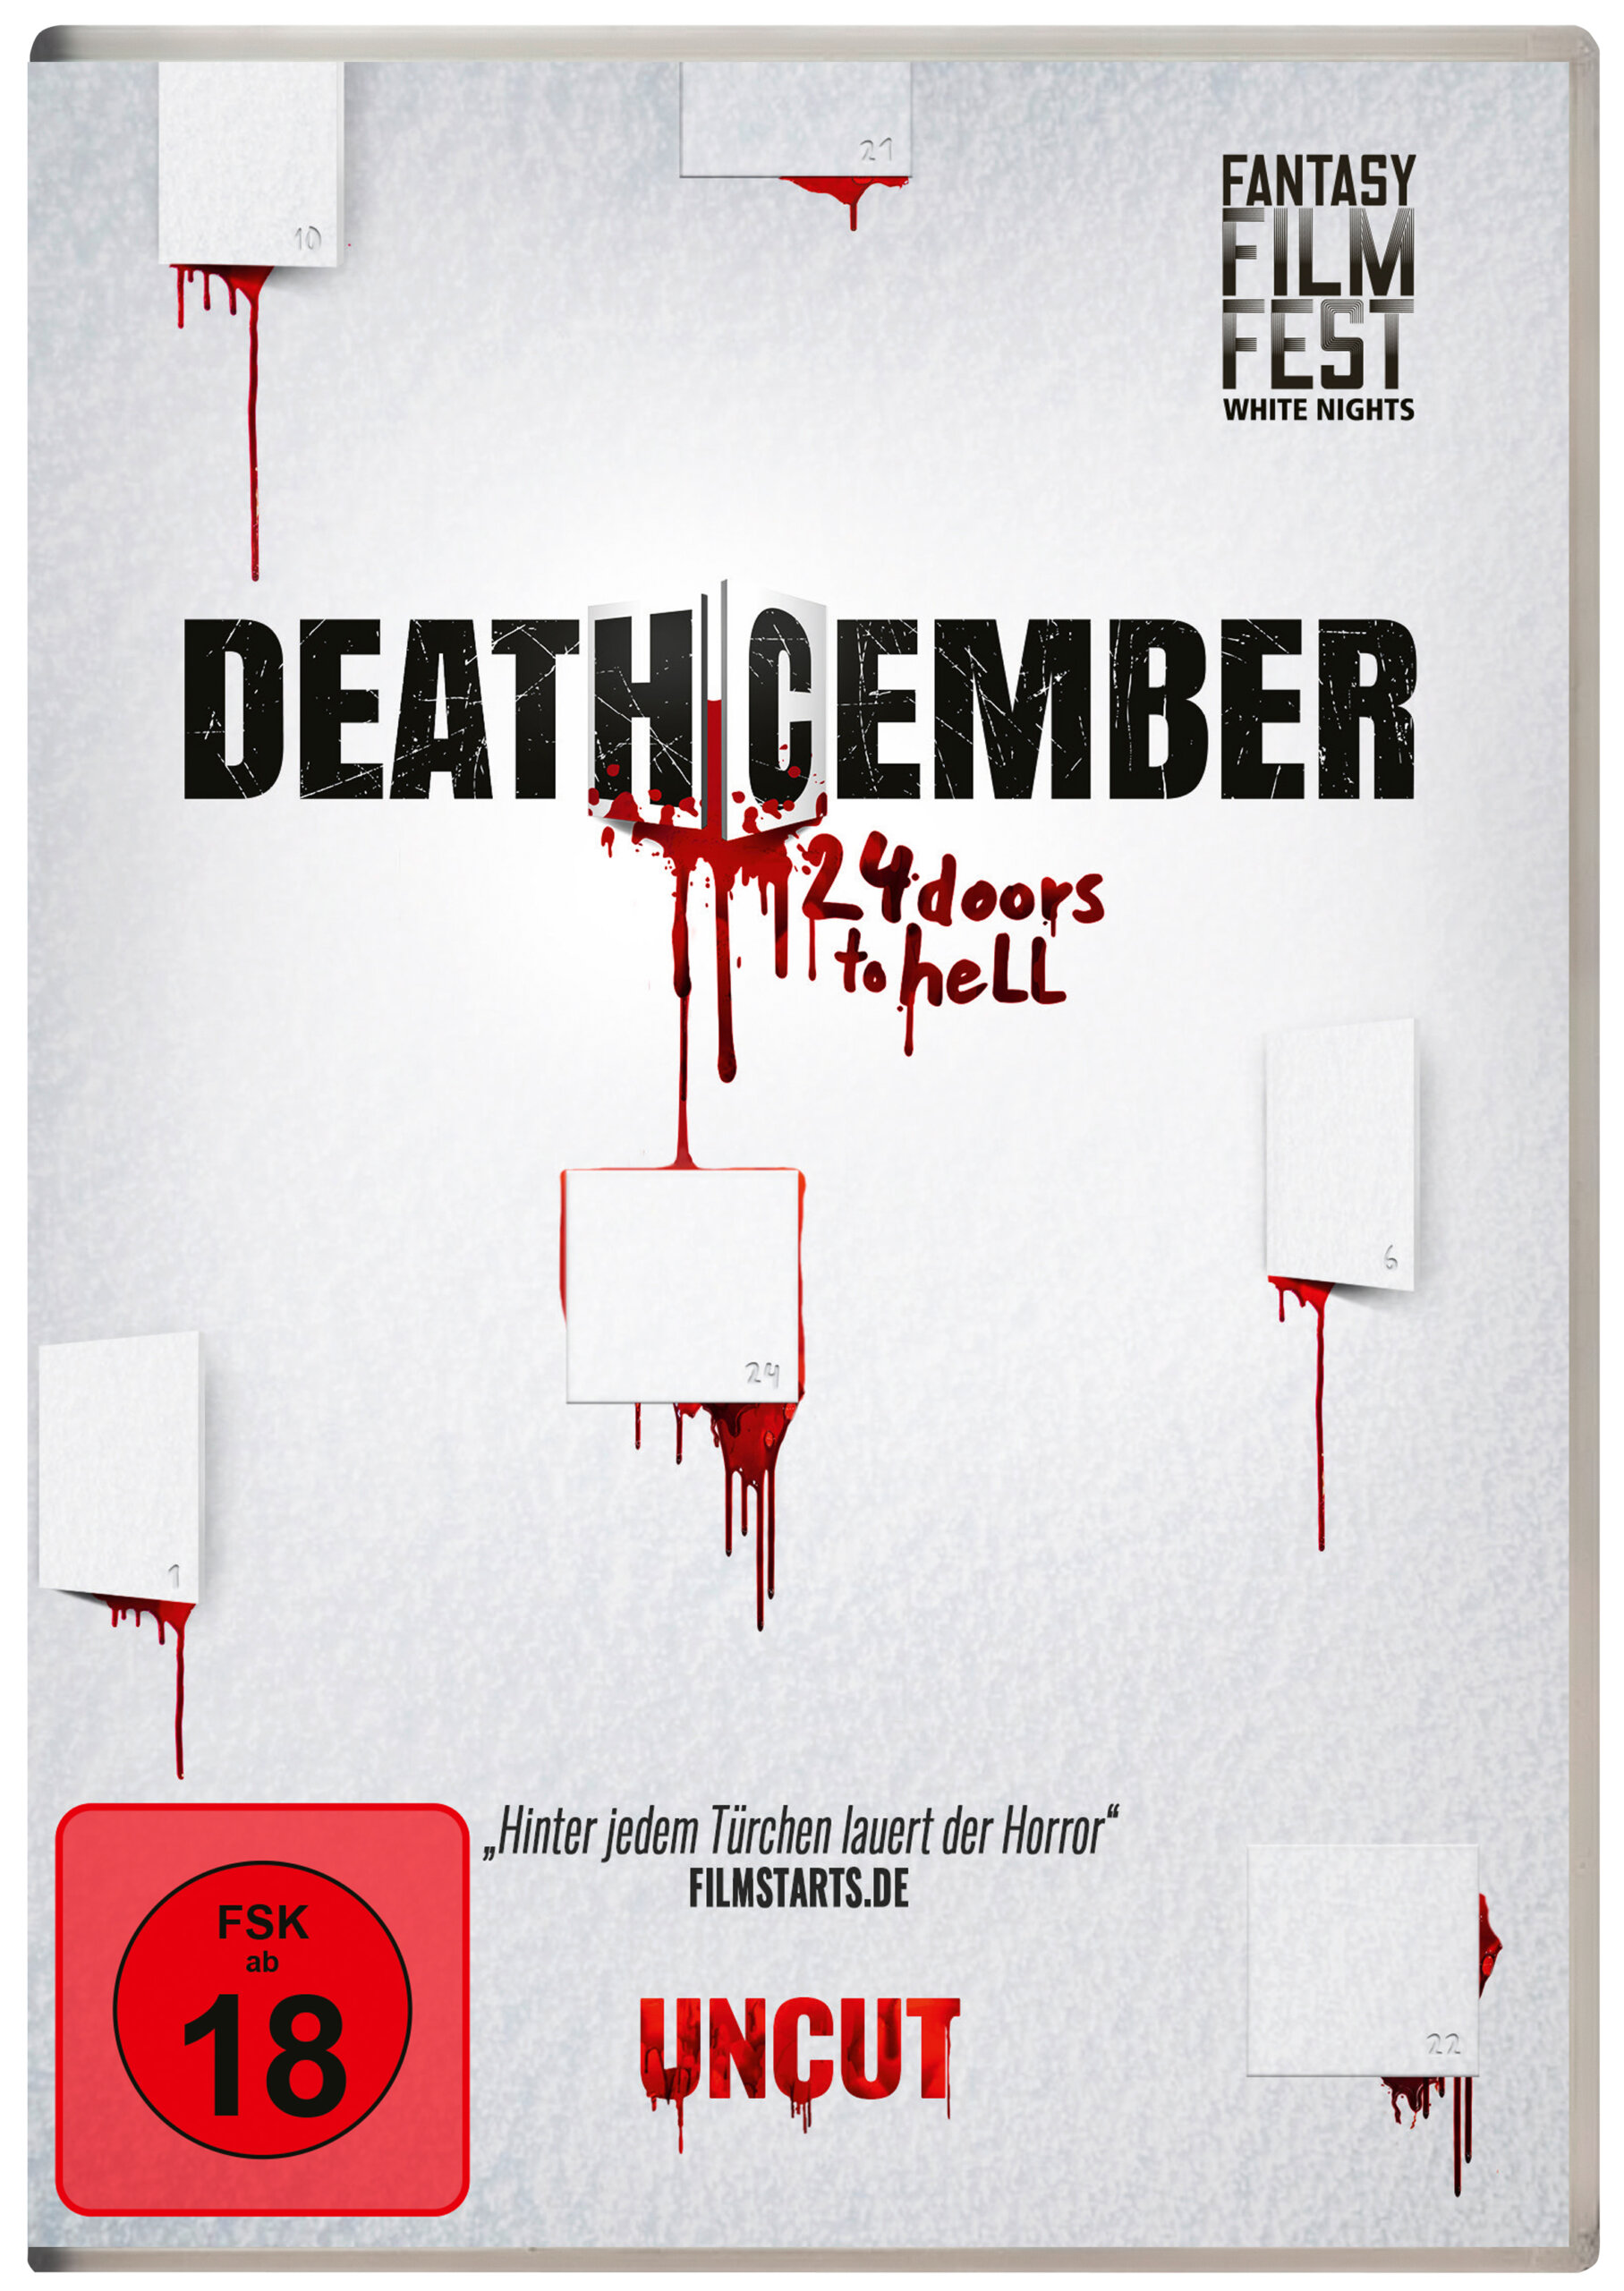 Deathcember - 24 Doors To hell